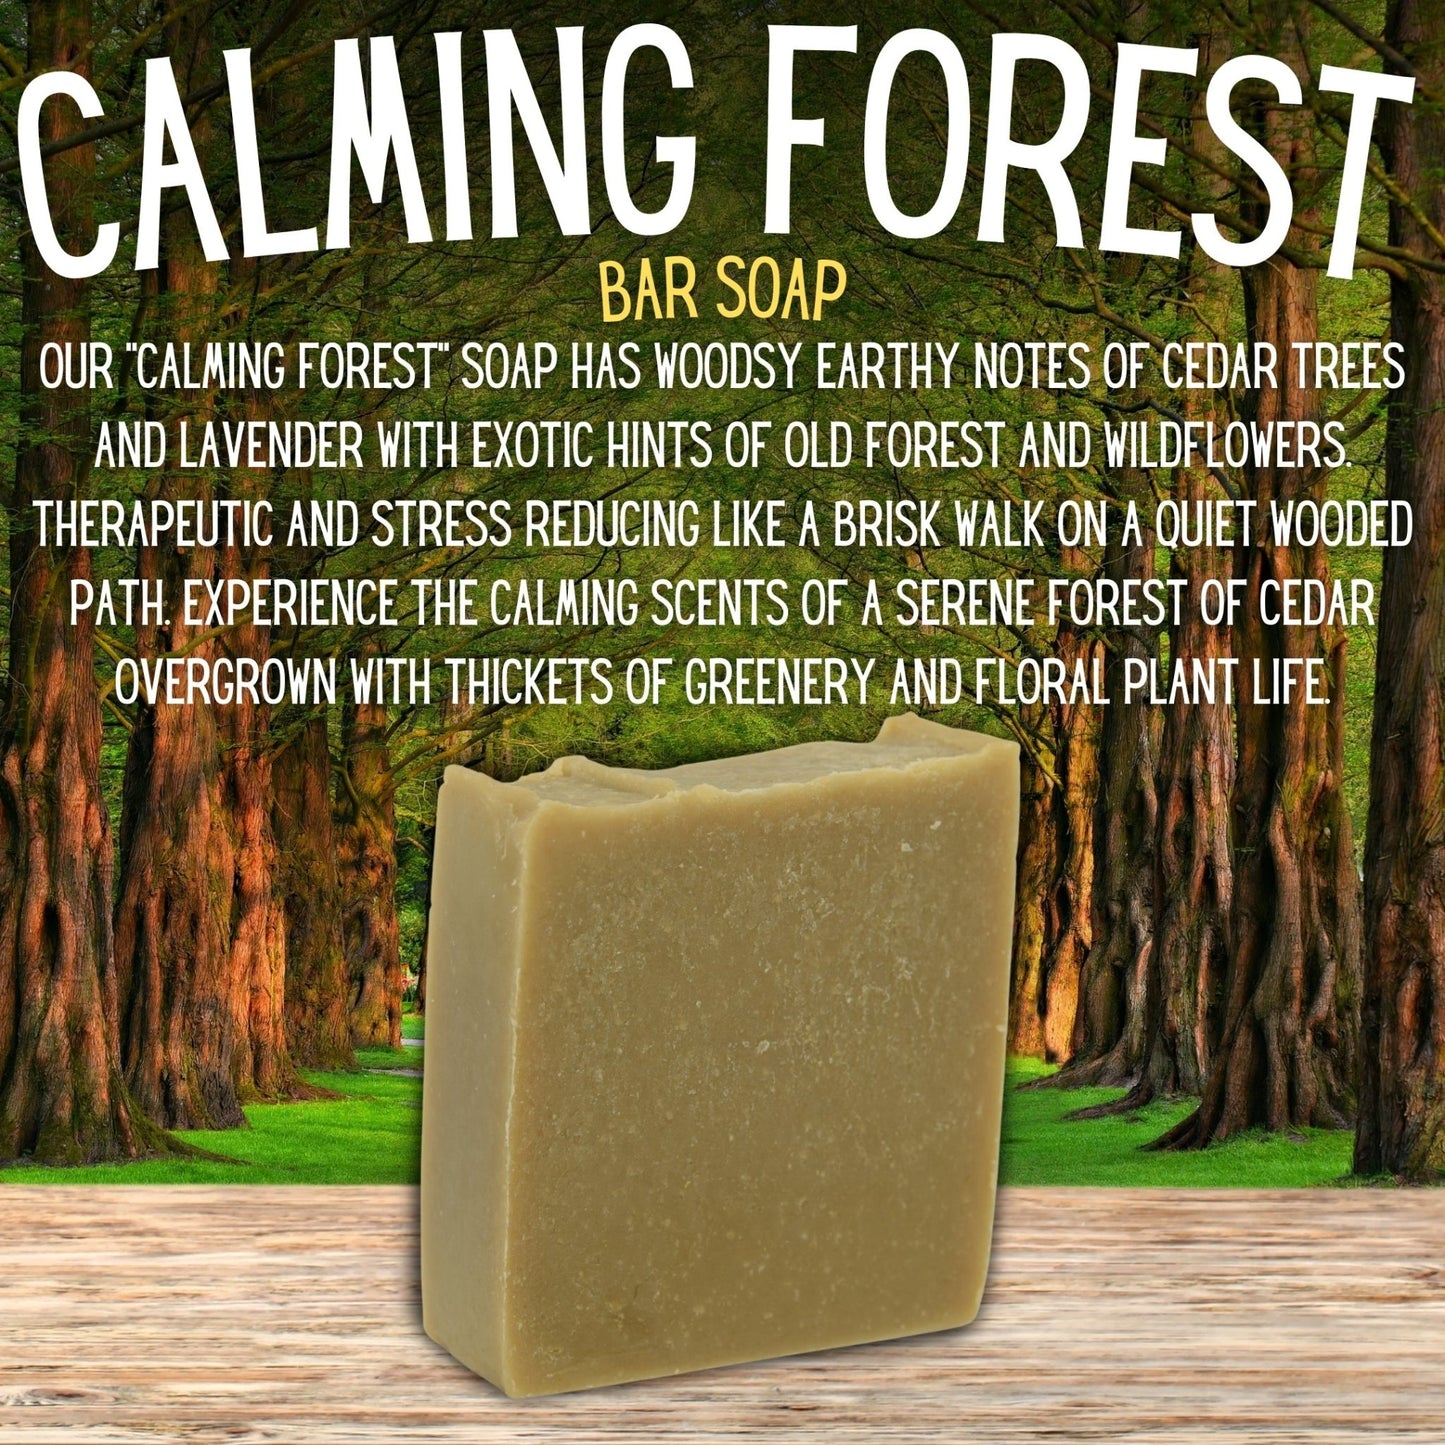 Calming Forest - BAR SOAP - Zero Grit - Grizzly Naturals Soap Company